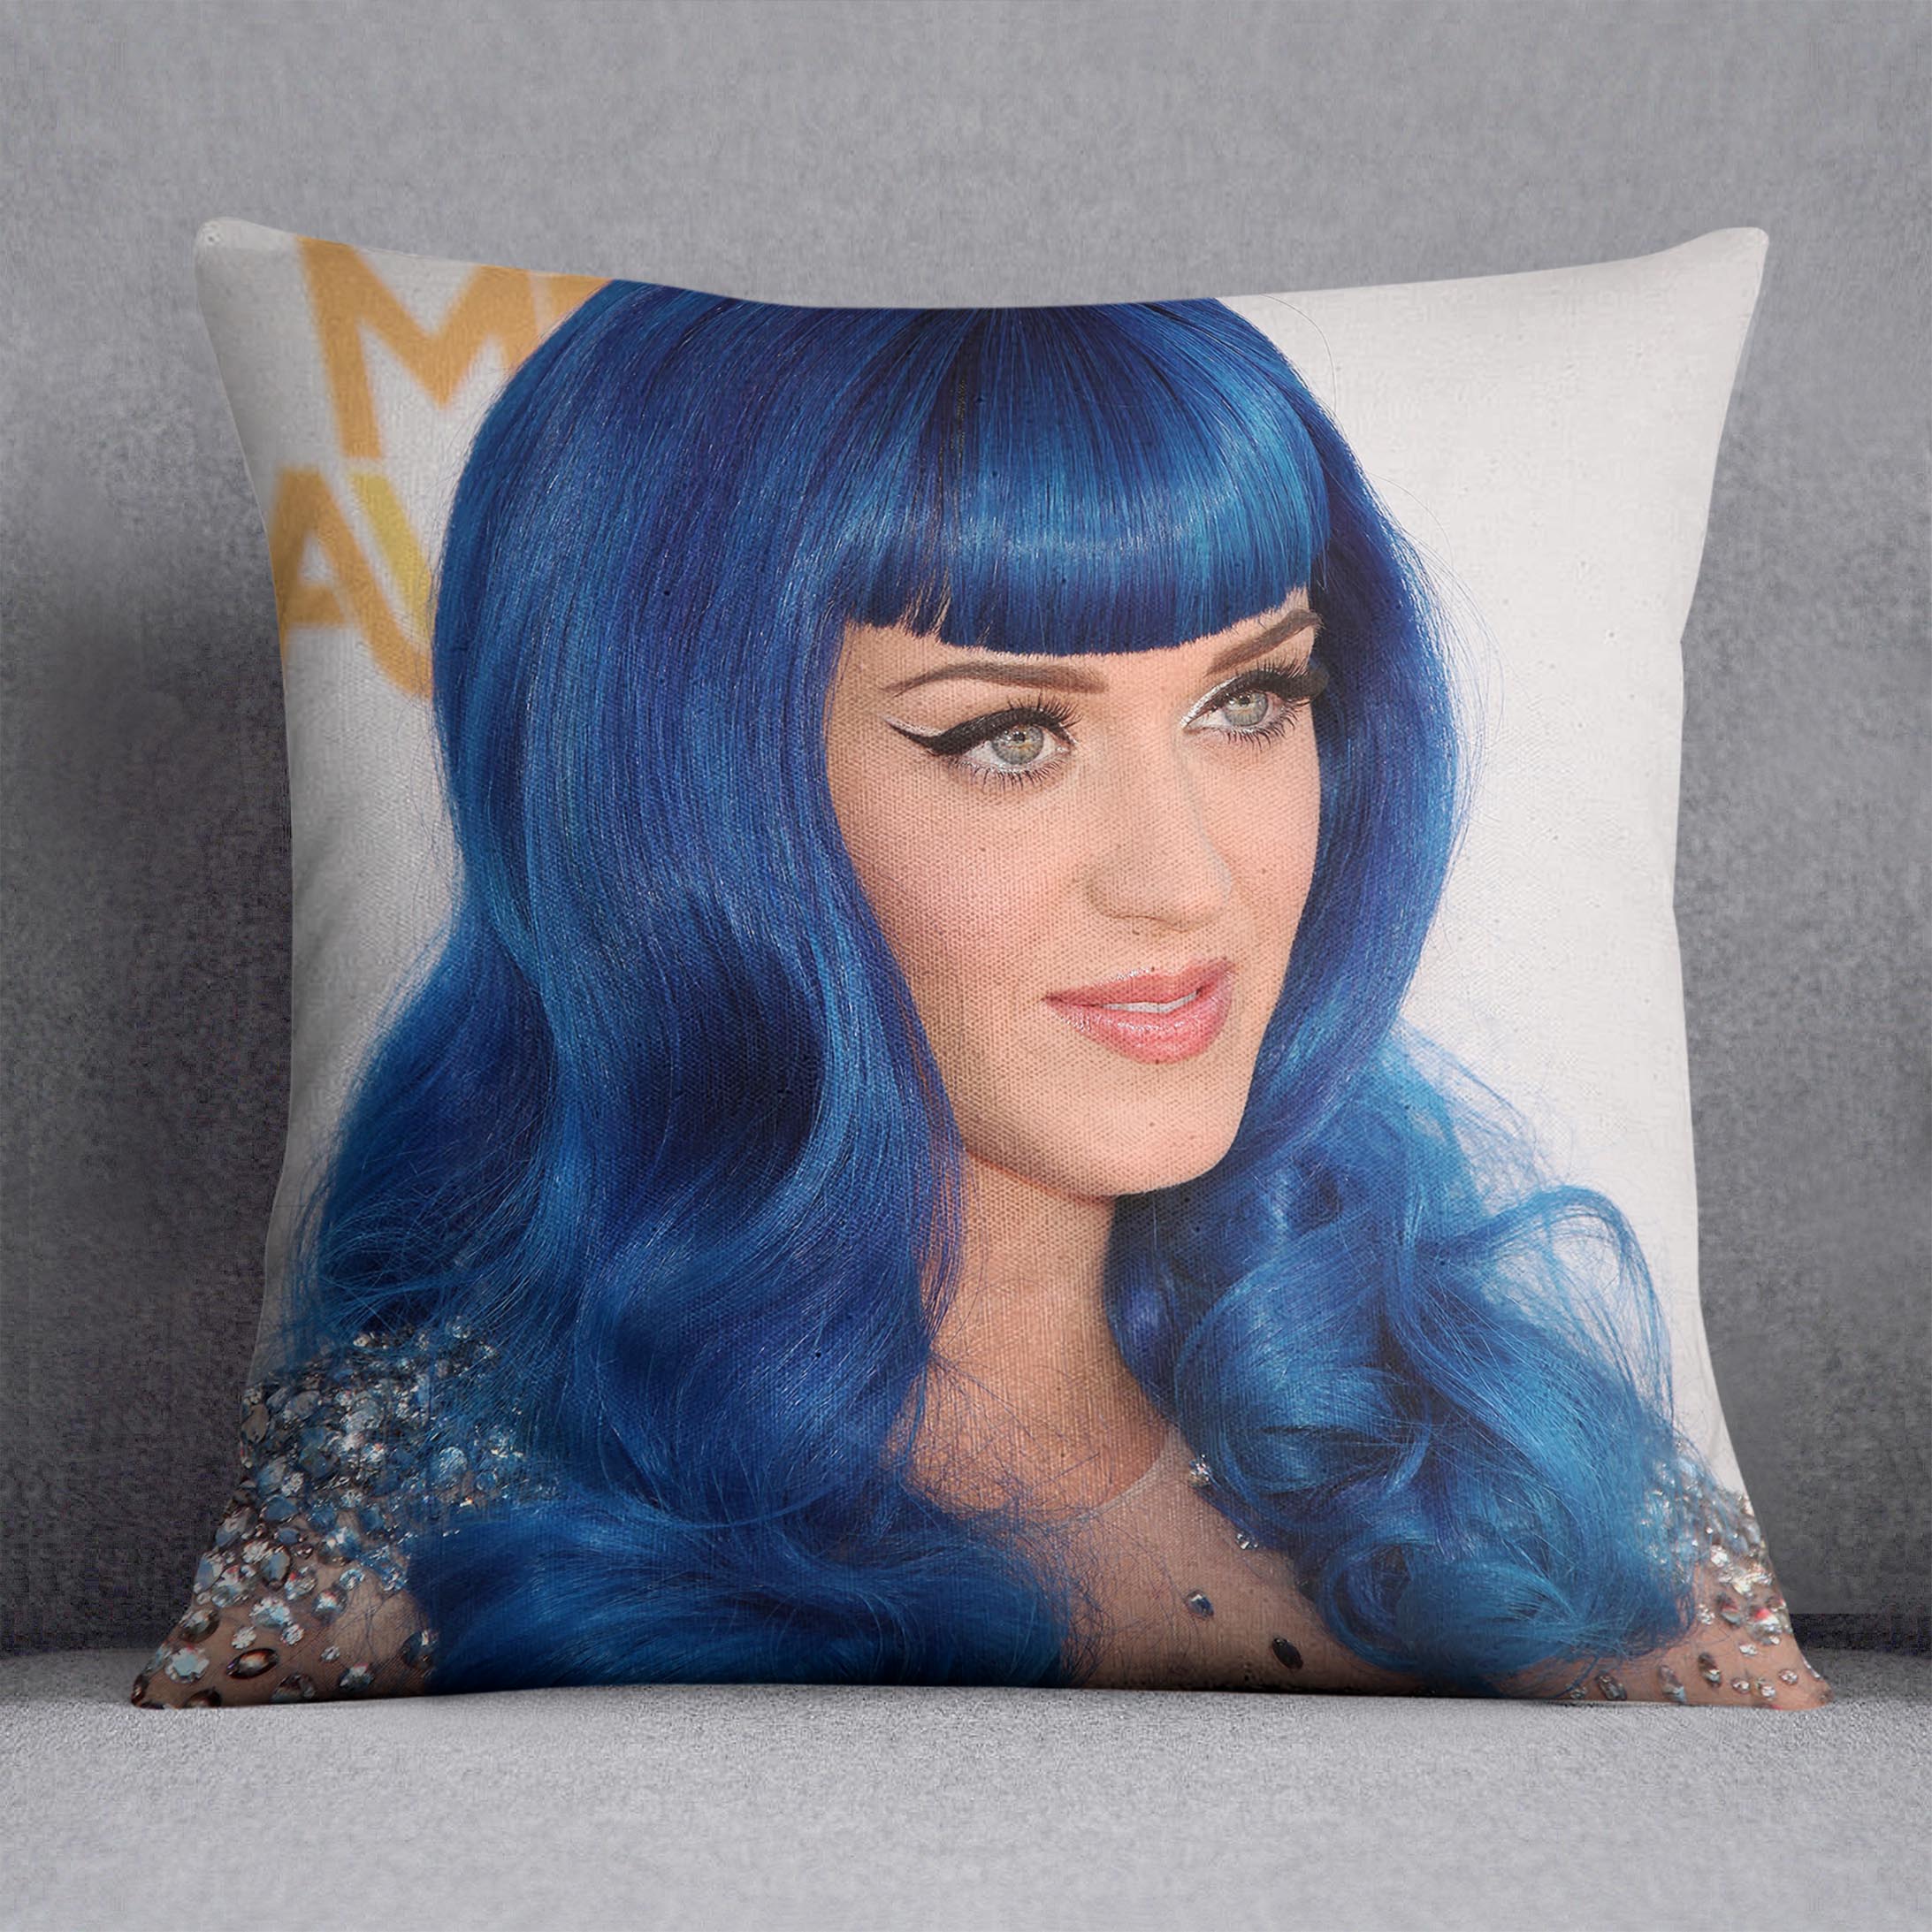 Katy Perry in blue Cushion